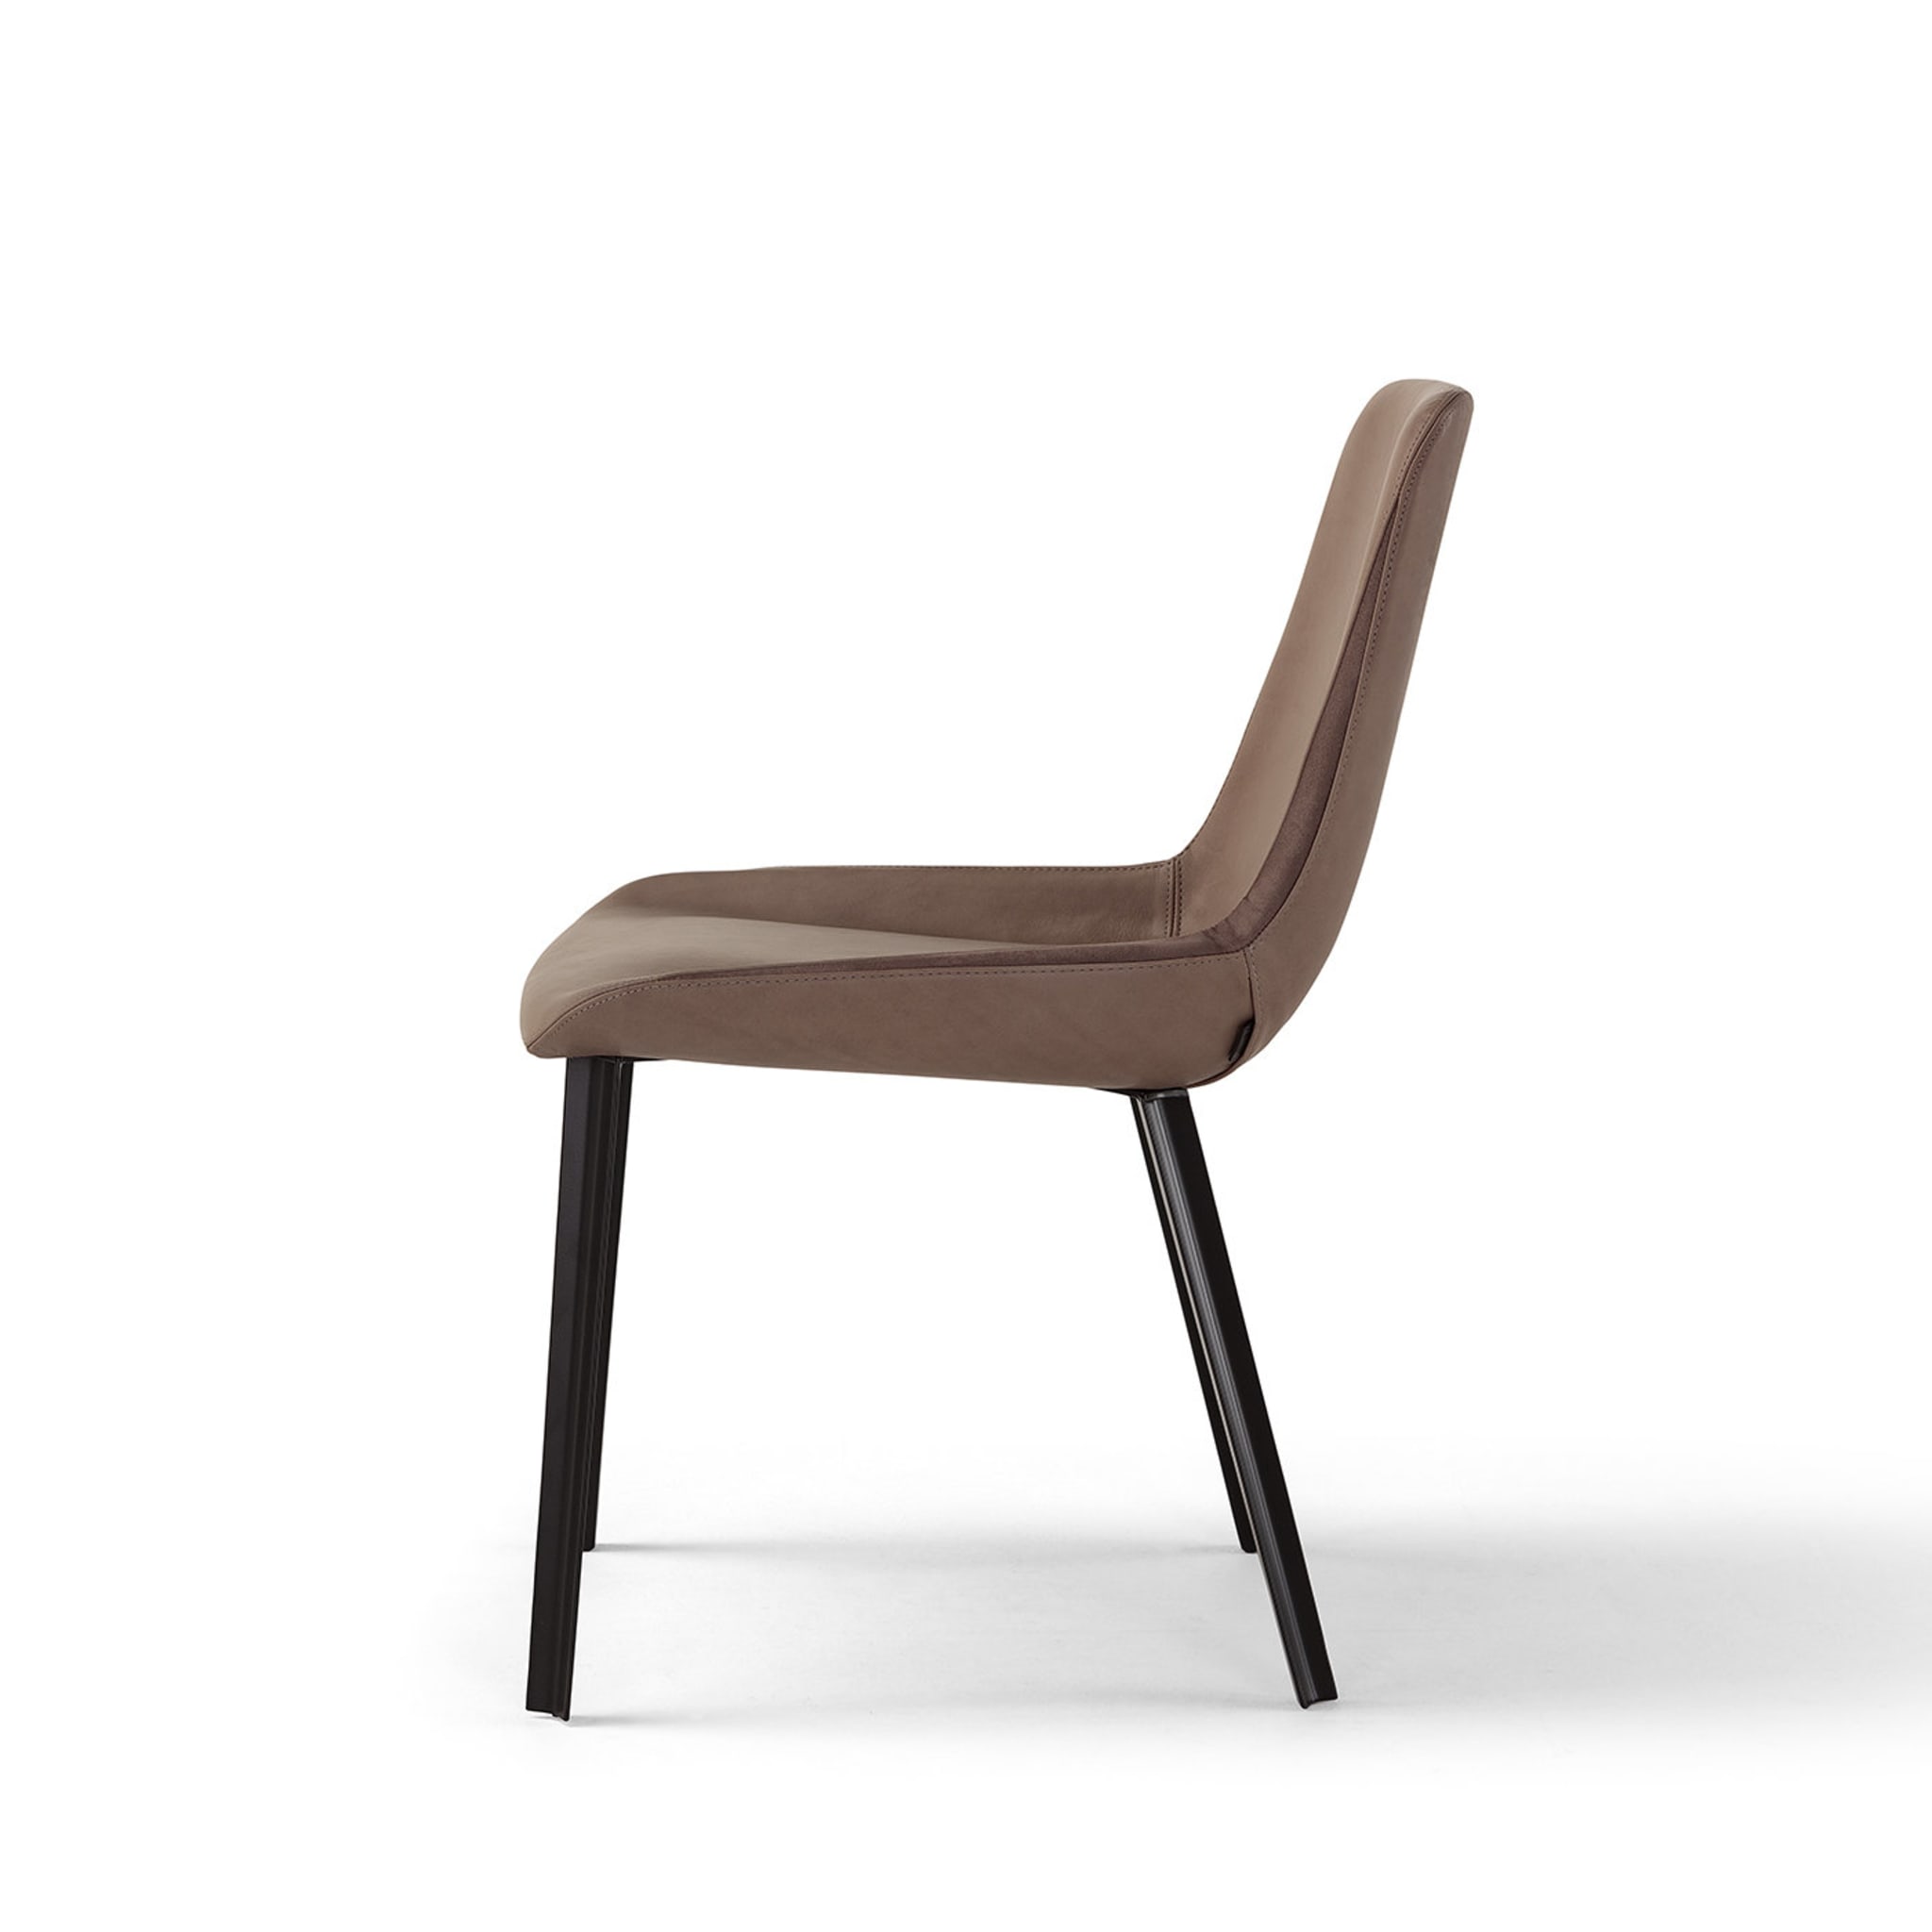 Panis Leather Chair by Anton Cristell and Emanuel Gargano - Alternative view 2